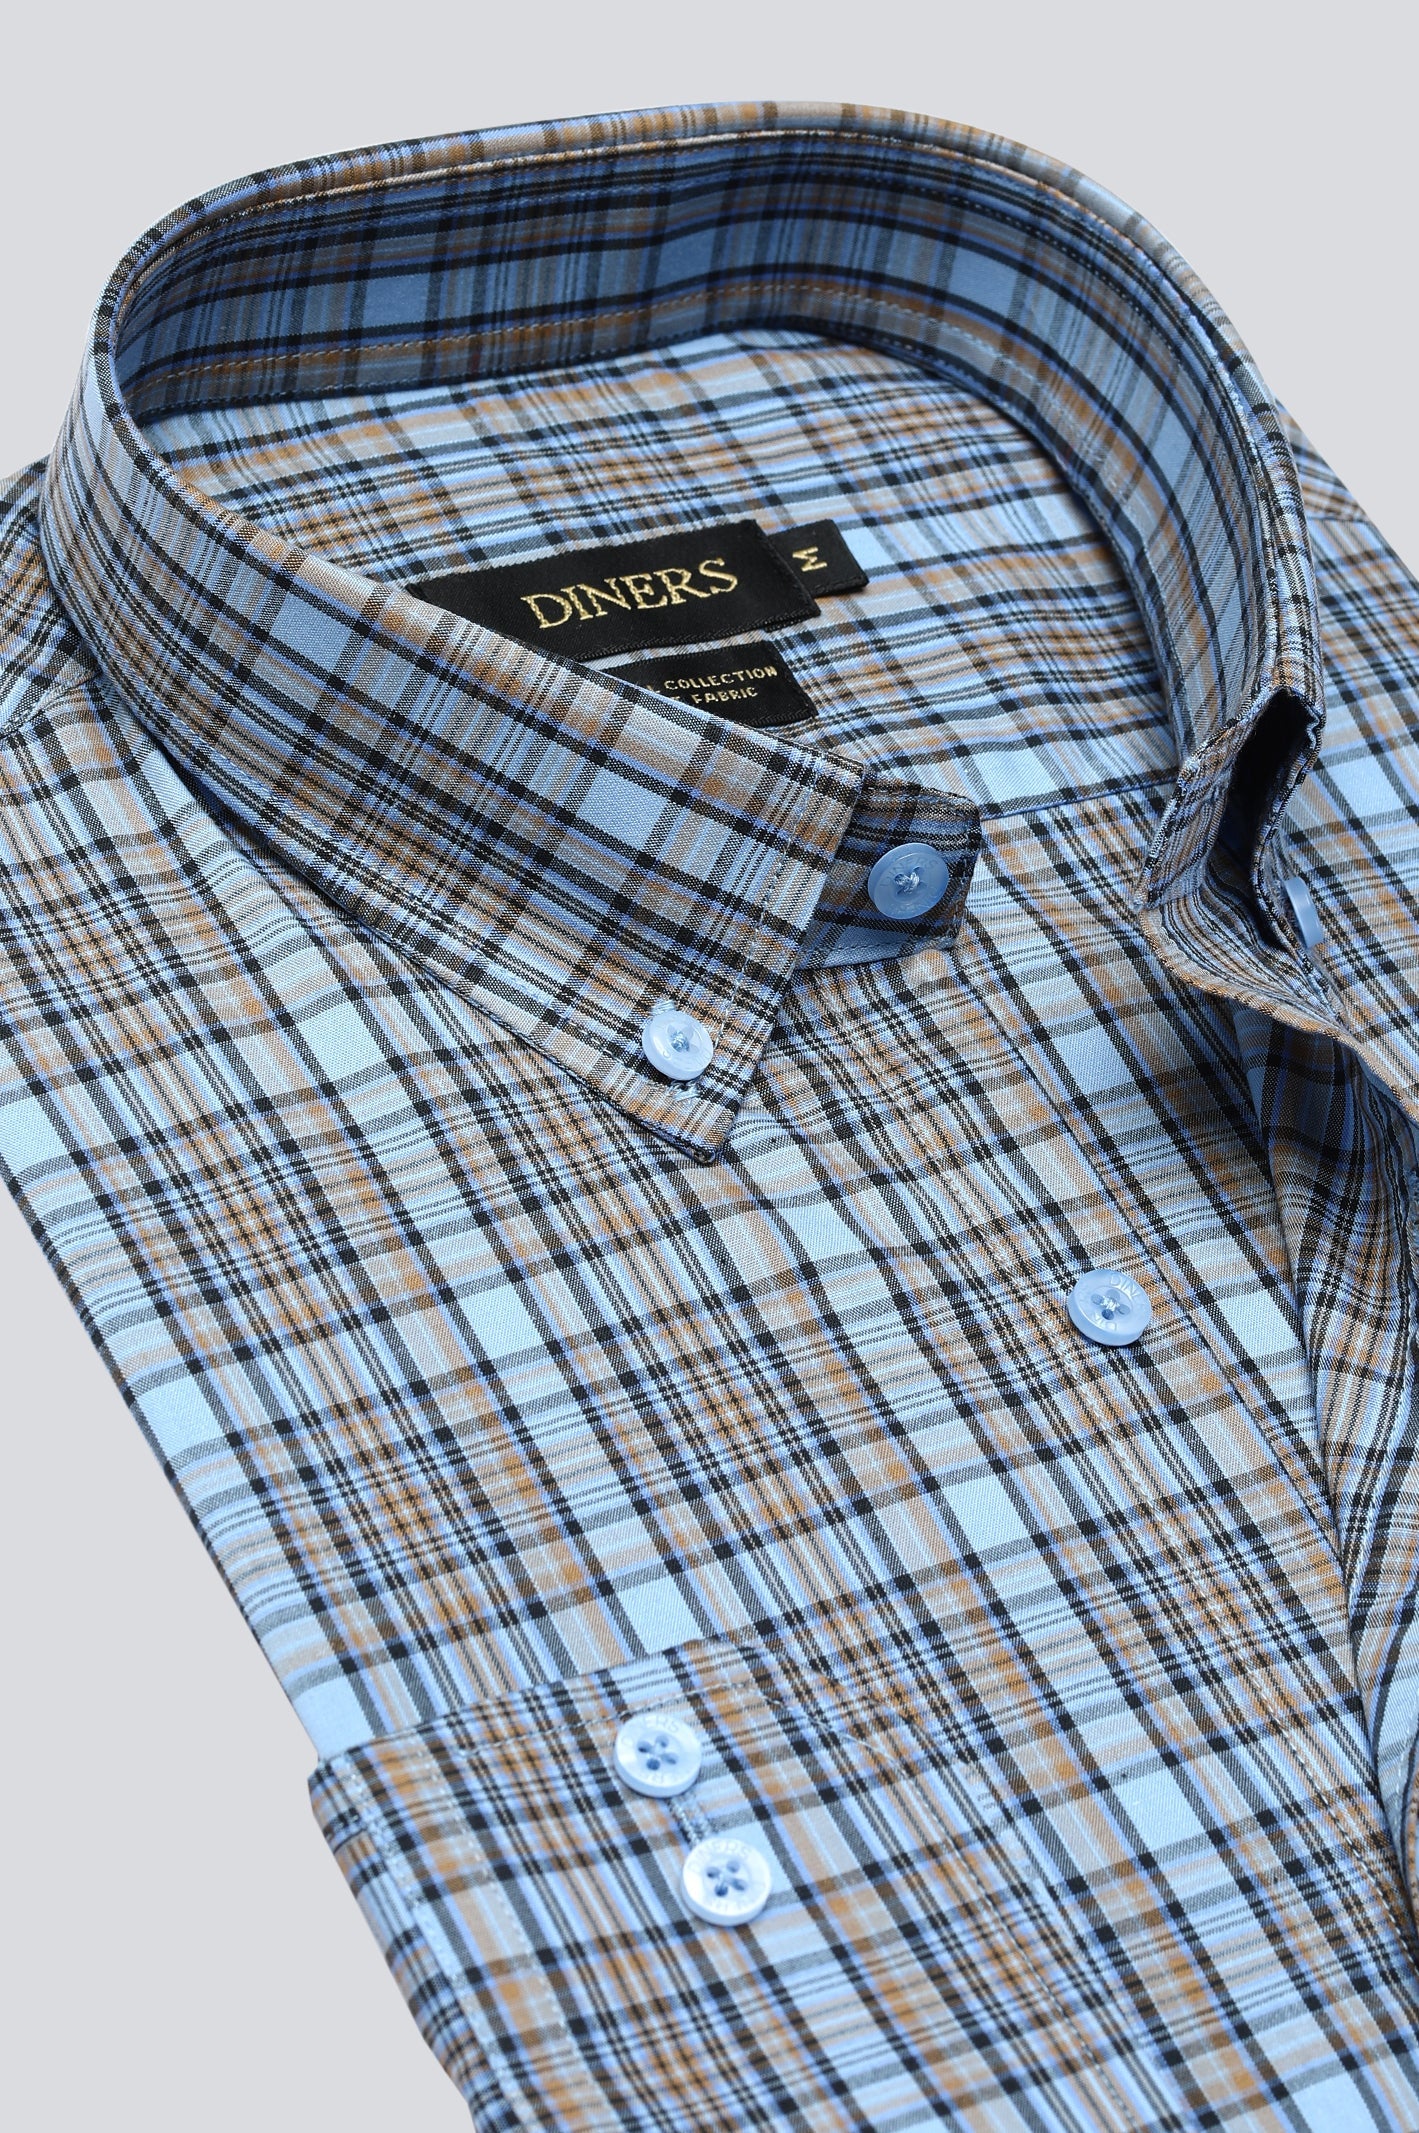 Casual Shirt for Men - Diners